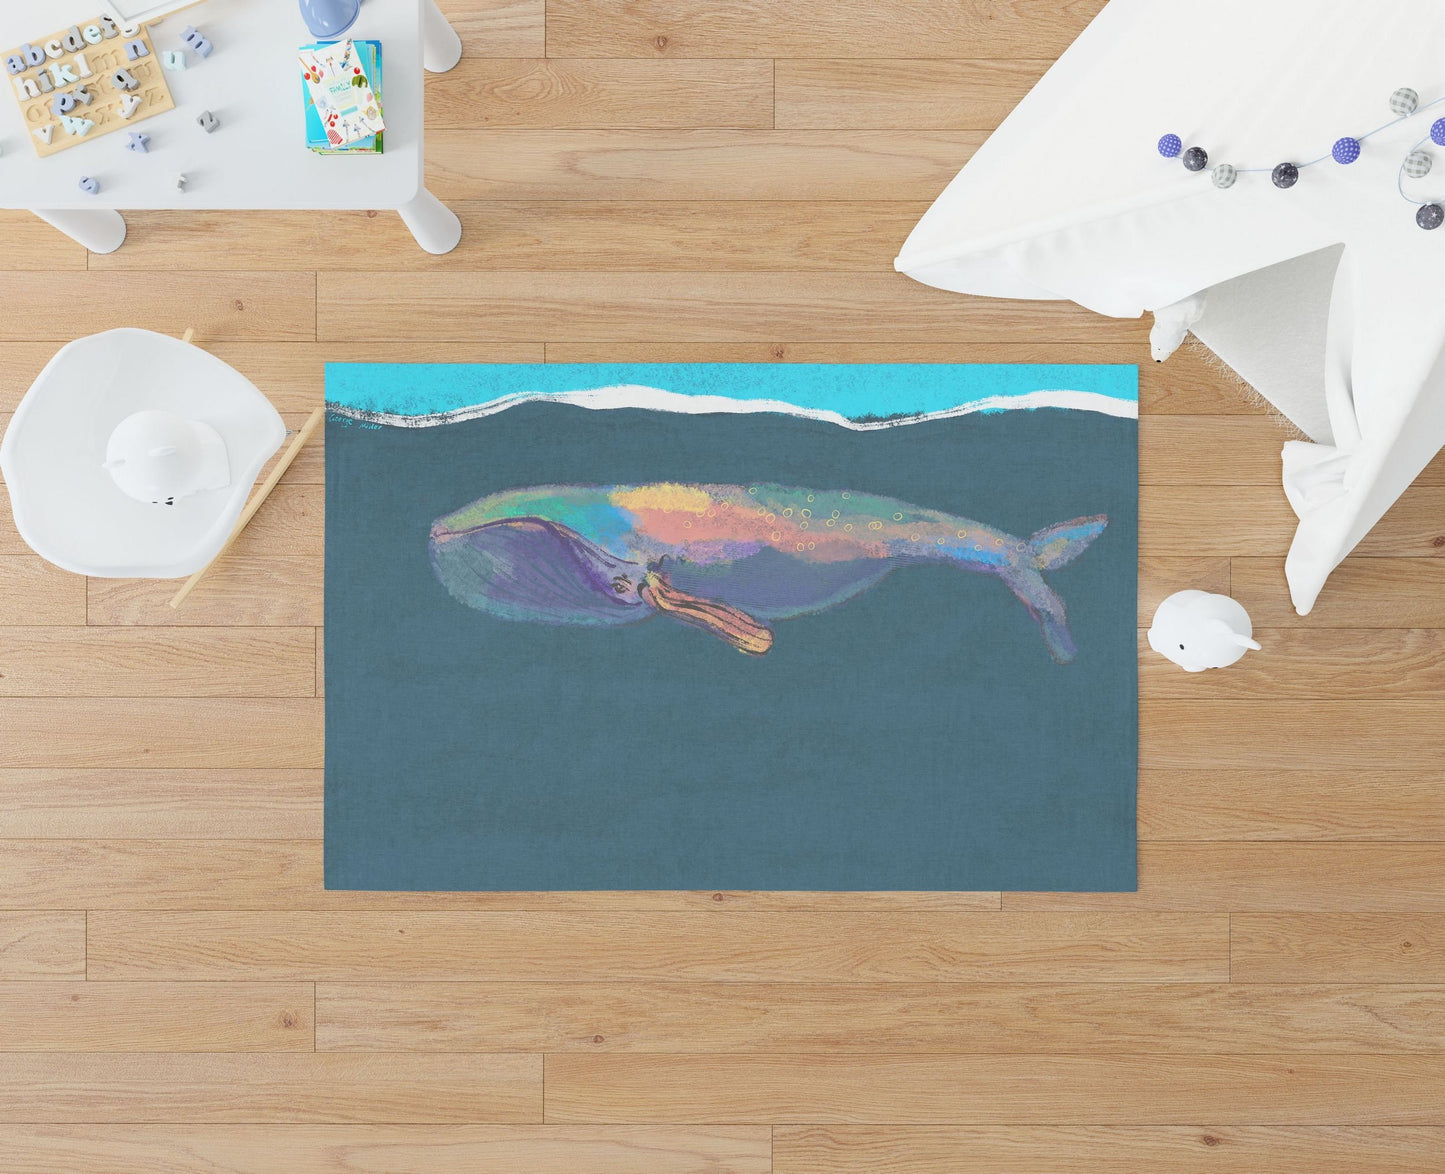 Kids Rug, Best Area Rug, 4X6 Area Rug, Thick Carpet, Rectangle Rug, Colorful Rug, Blue Whale, Modern Area Rug, Living Room Mat, Made In USA